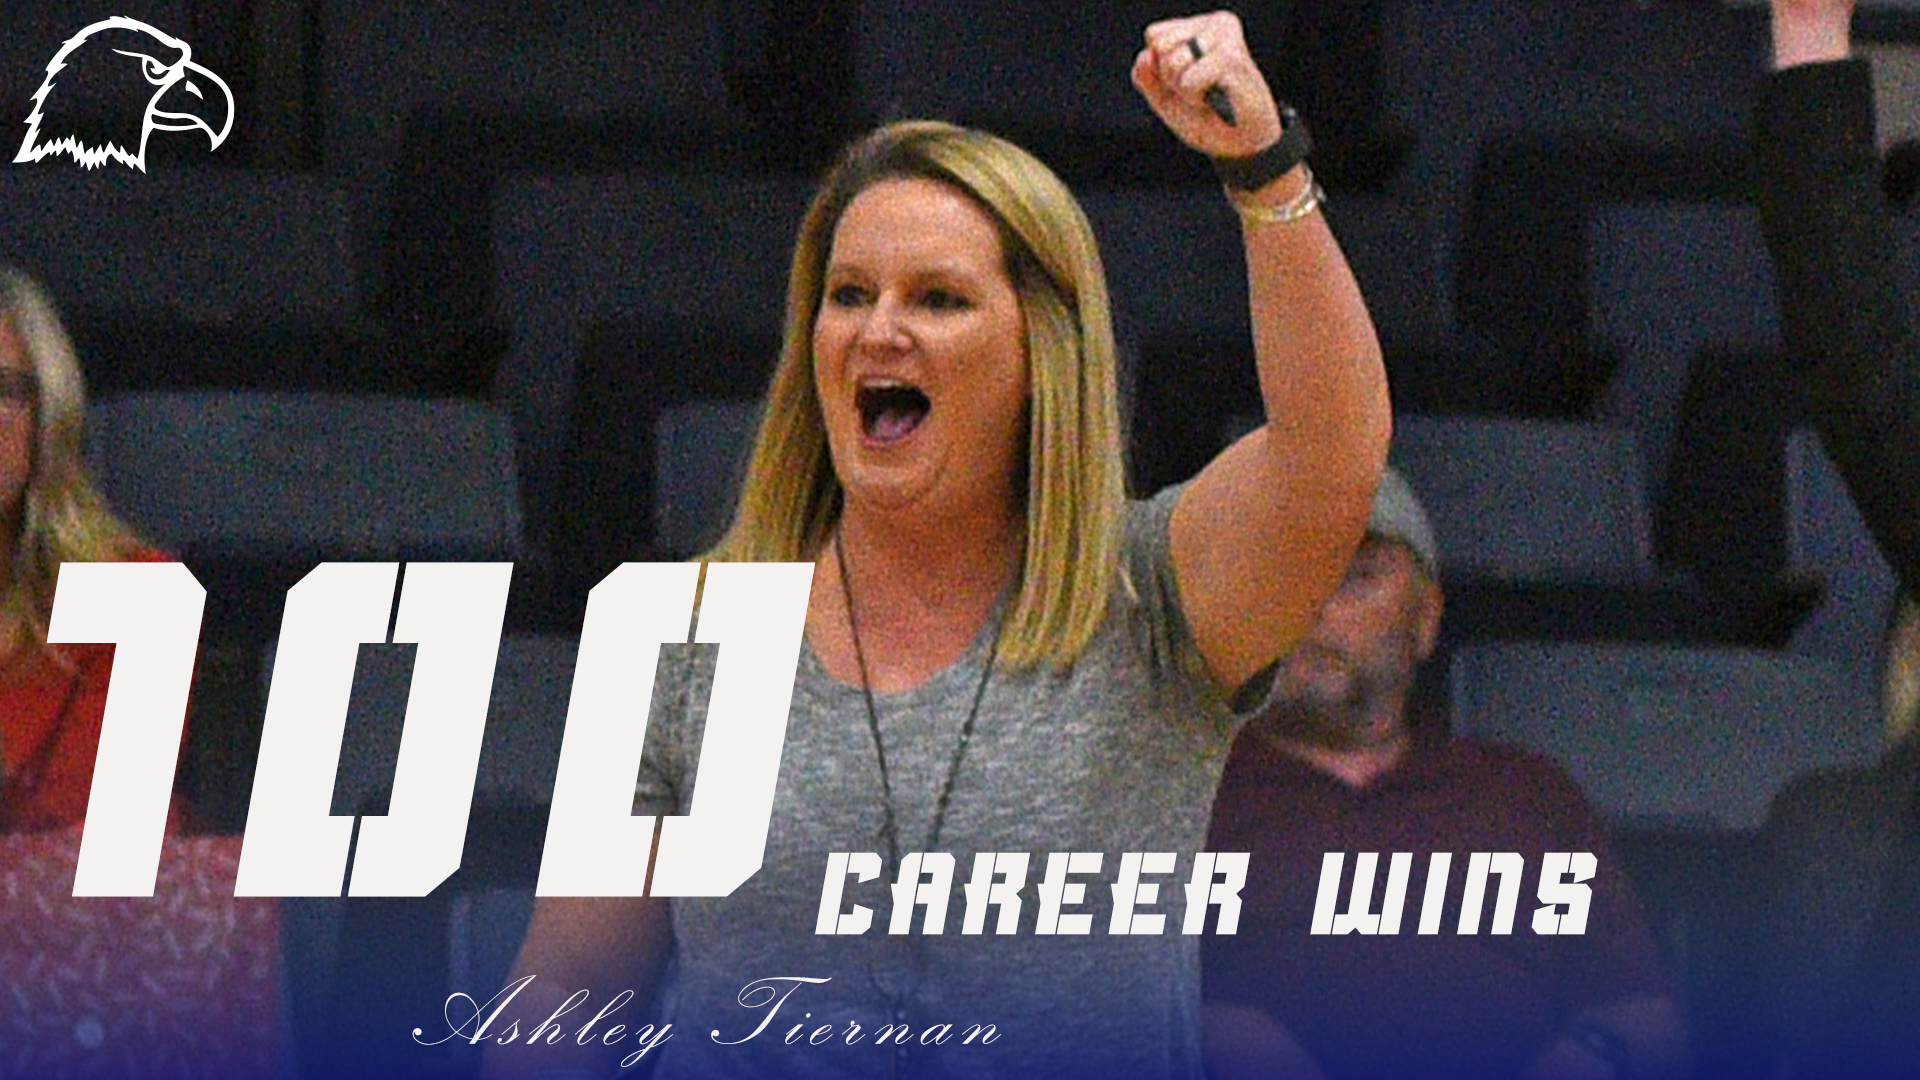 Tiernan earns her 100th career win over UVA Wise at Holt Fieldhouse 